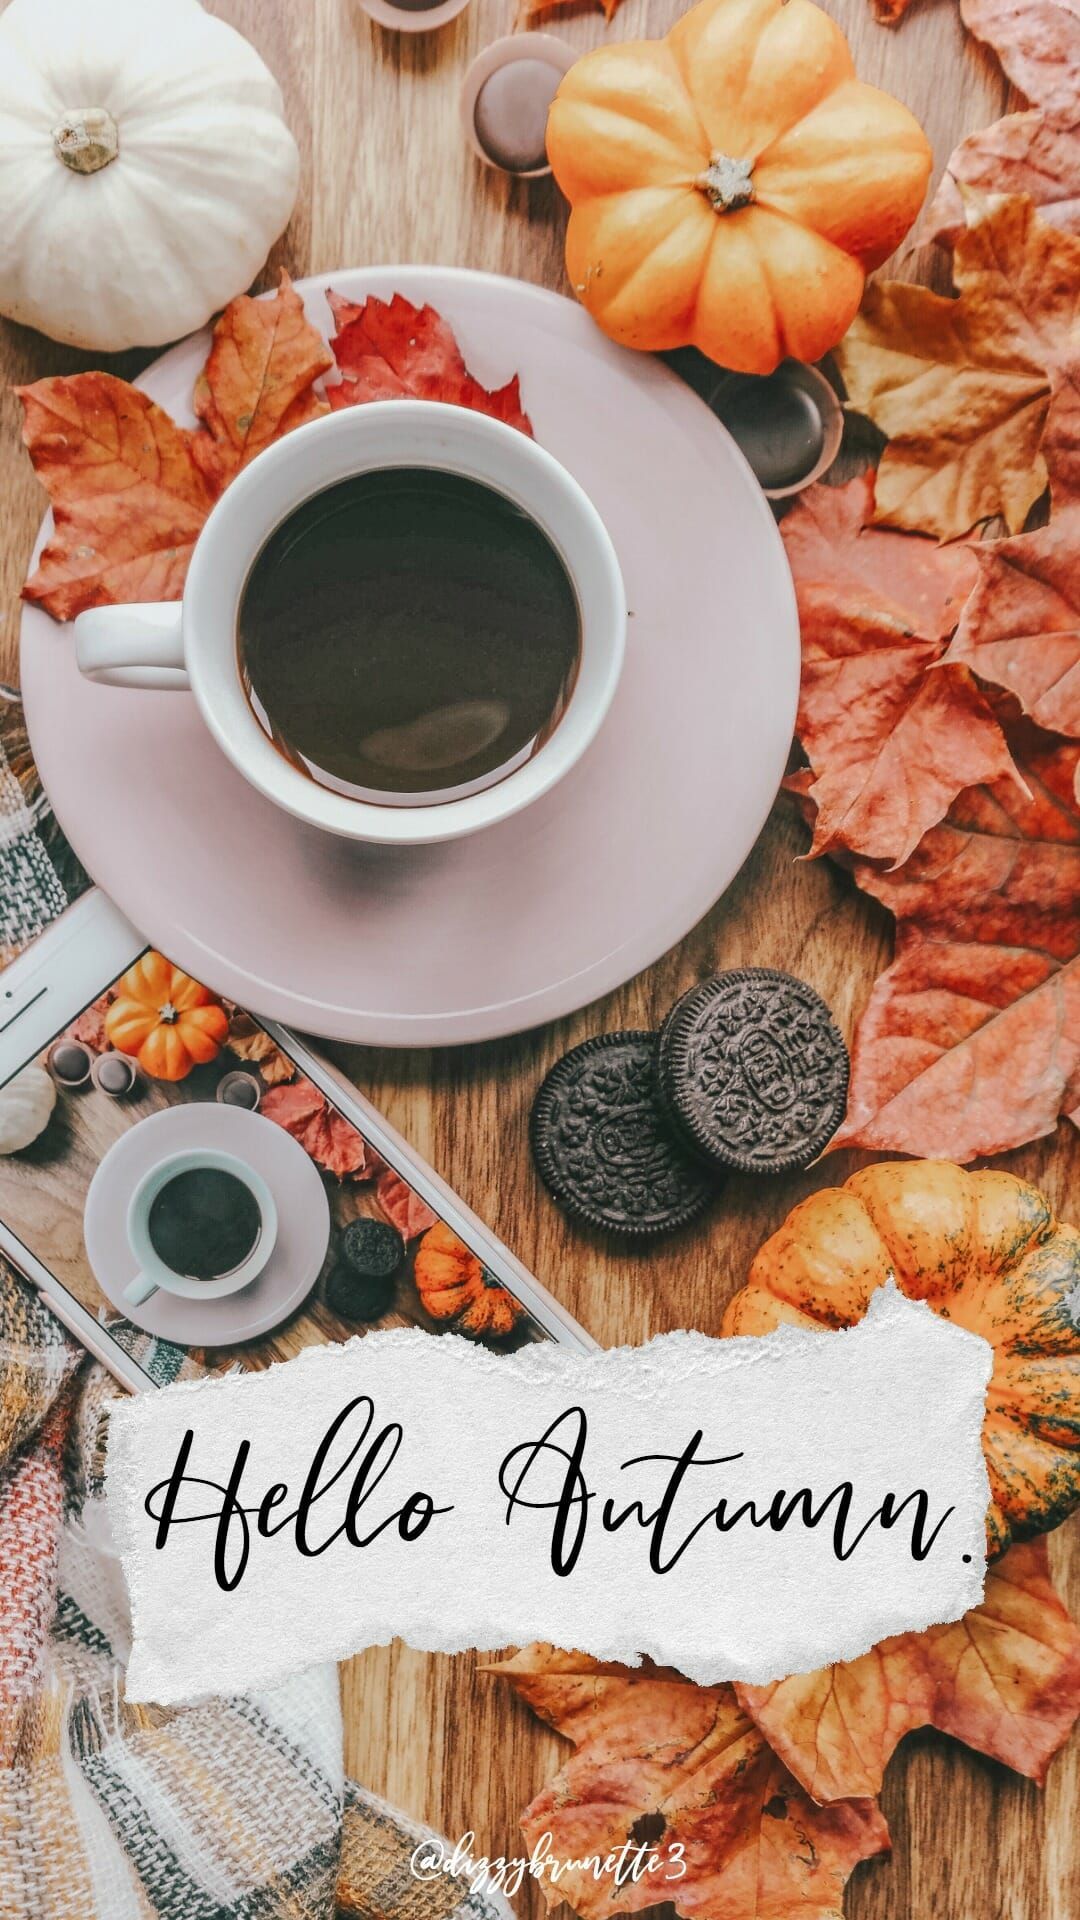 Free Amazing Fall Wallpaper Background For iPhone. Fall wallpaper, iPhone wallpaper vintage, Fall background